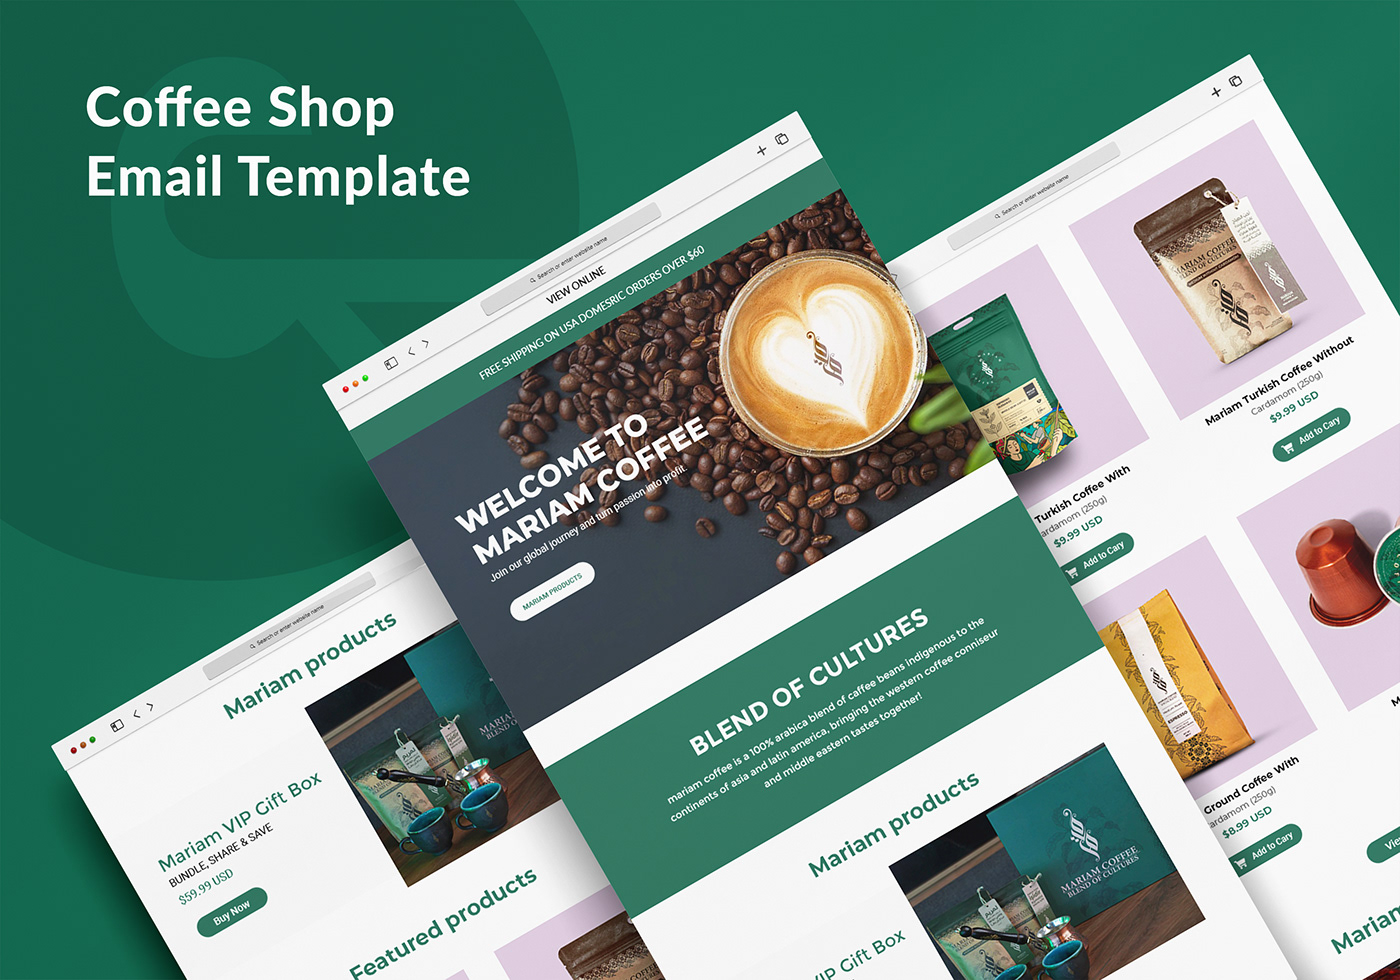 Coffee Shop Email Template Design & Develop